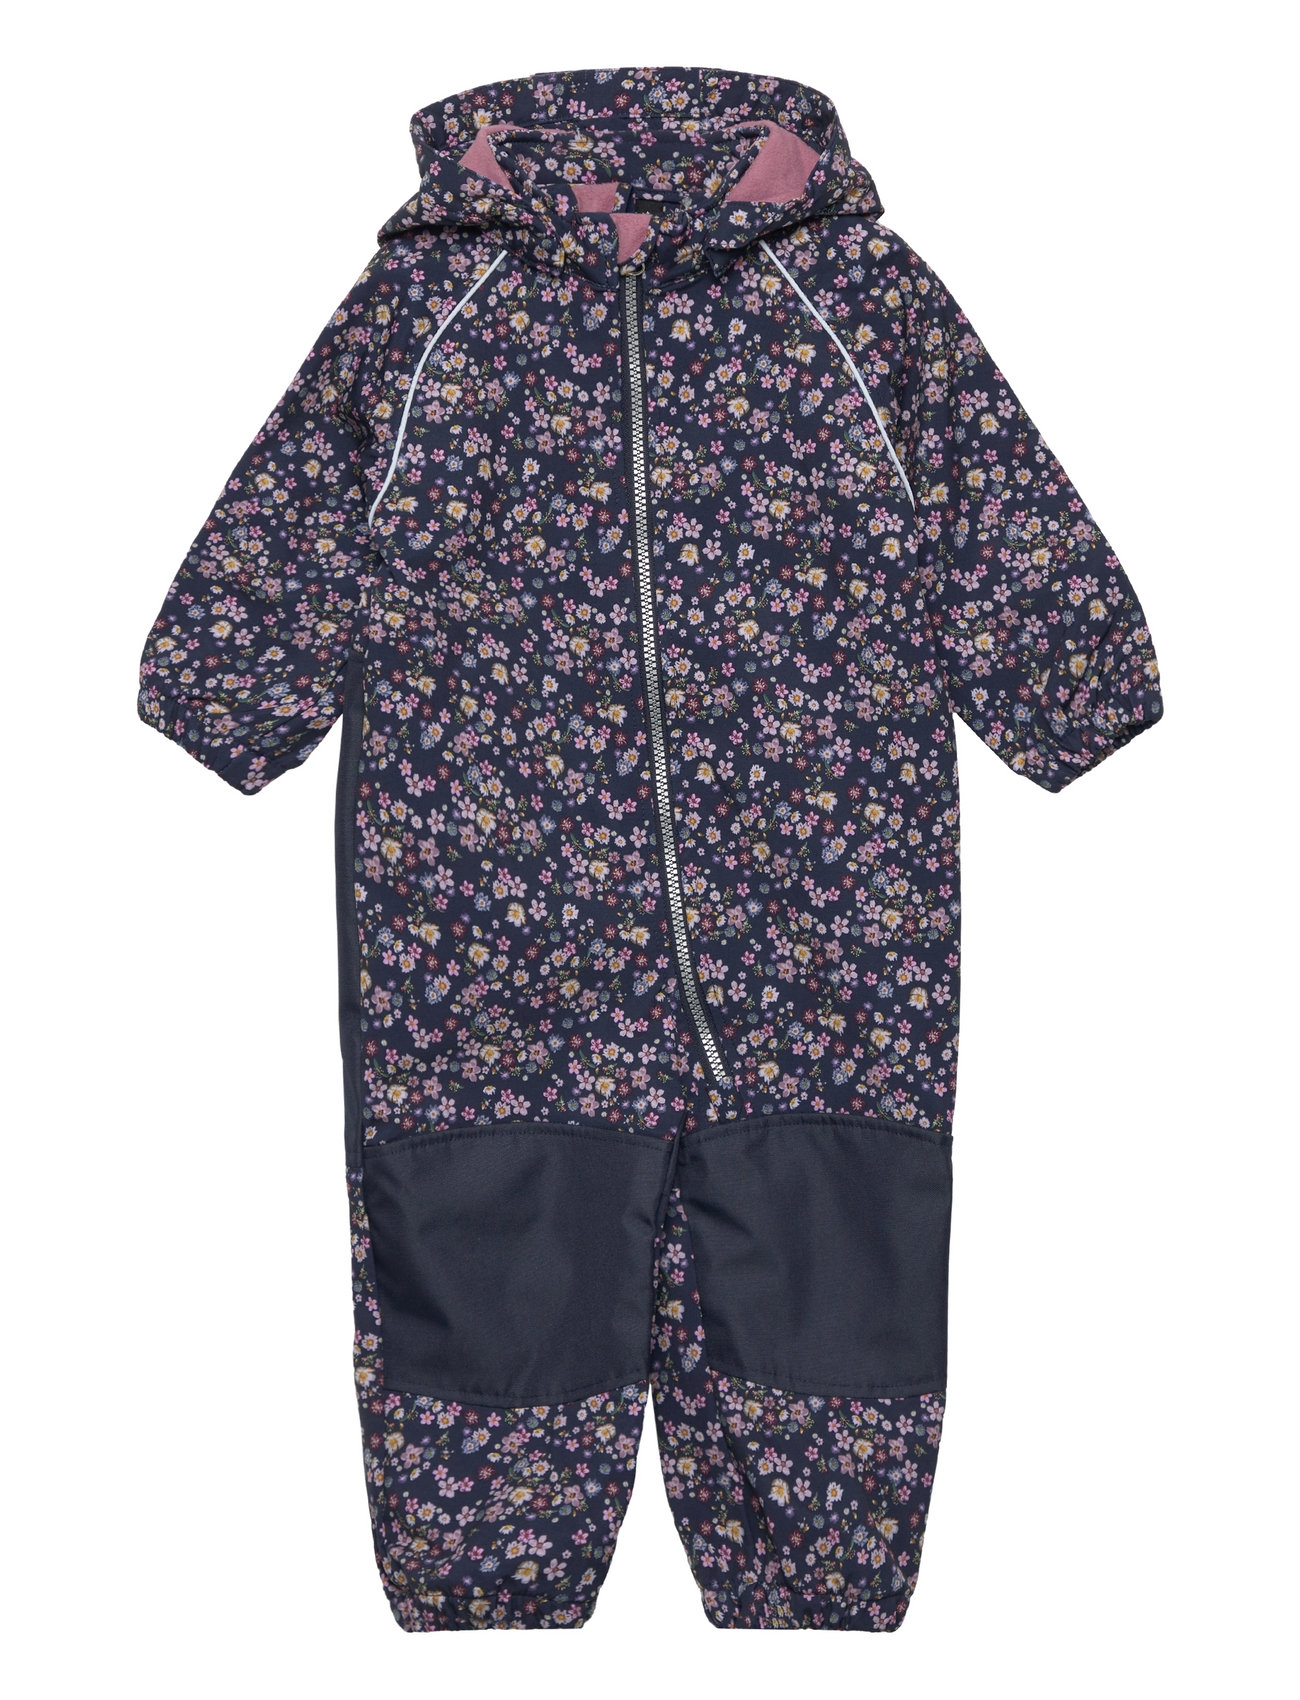 Große Auswahl name it Nmfalfa08 Flower Coveralls it Fo Buy Fast €. and returns at Boozt.com. from online 28.50 - easy name delivery Suit Liberty